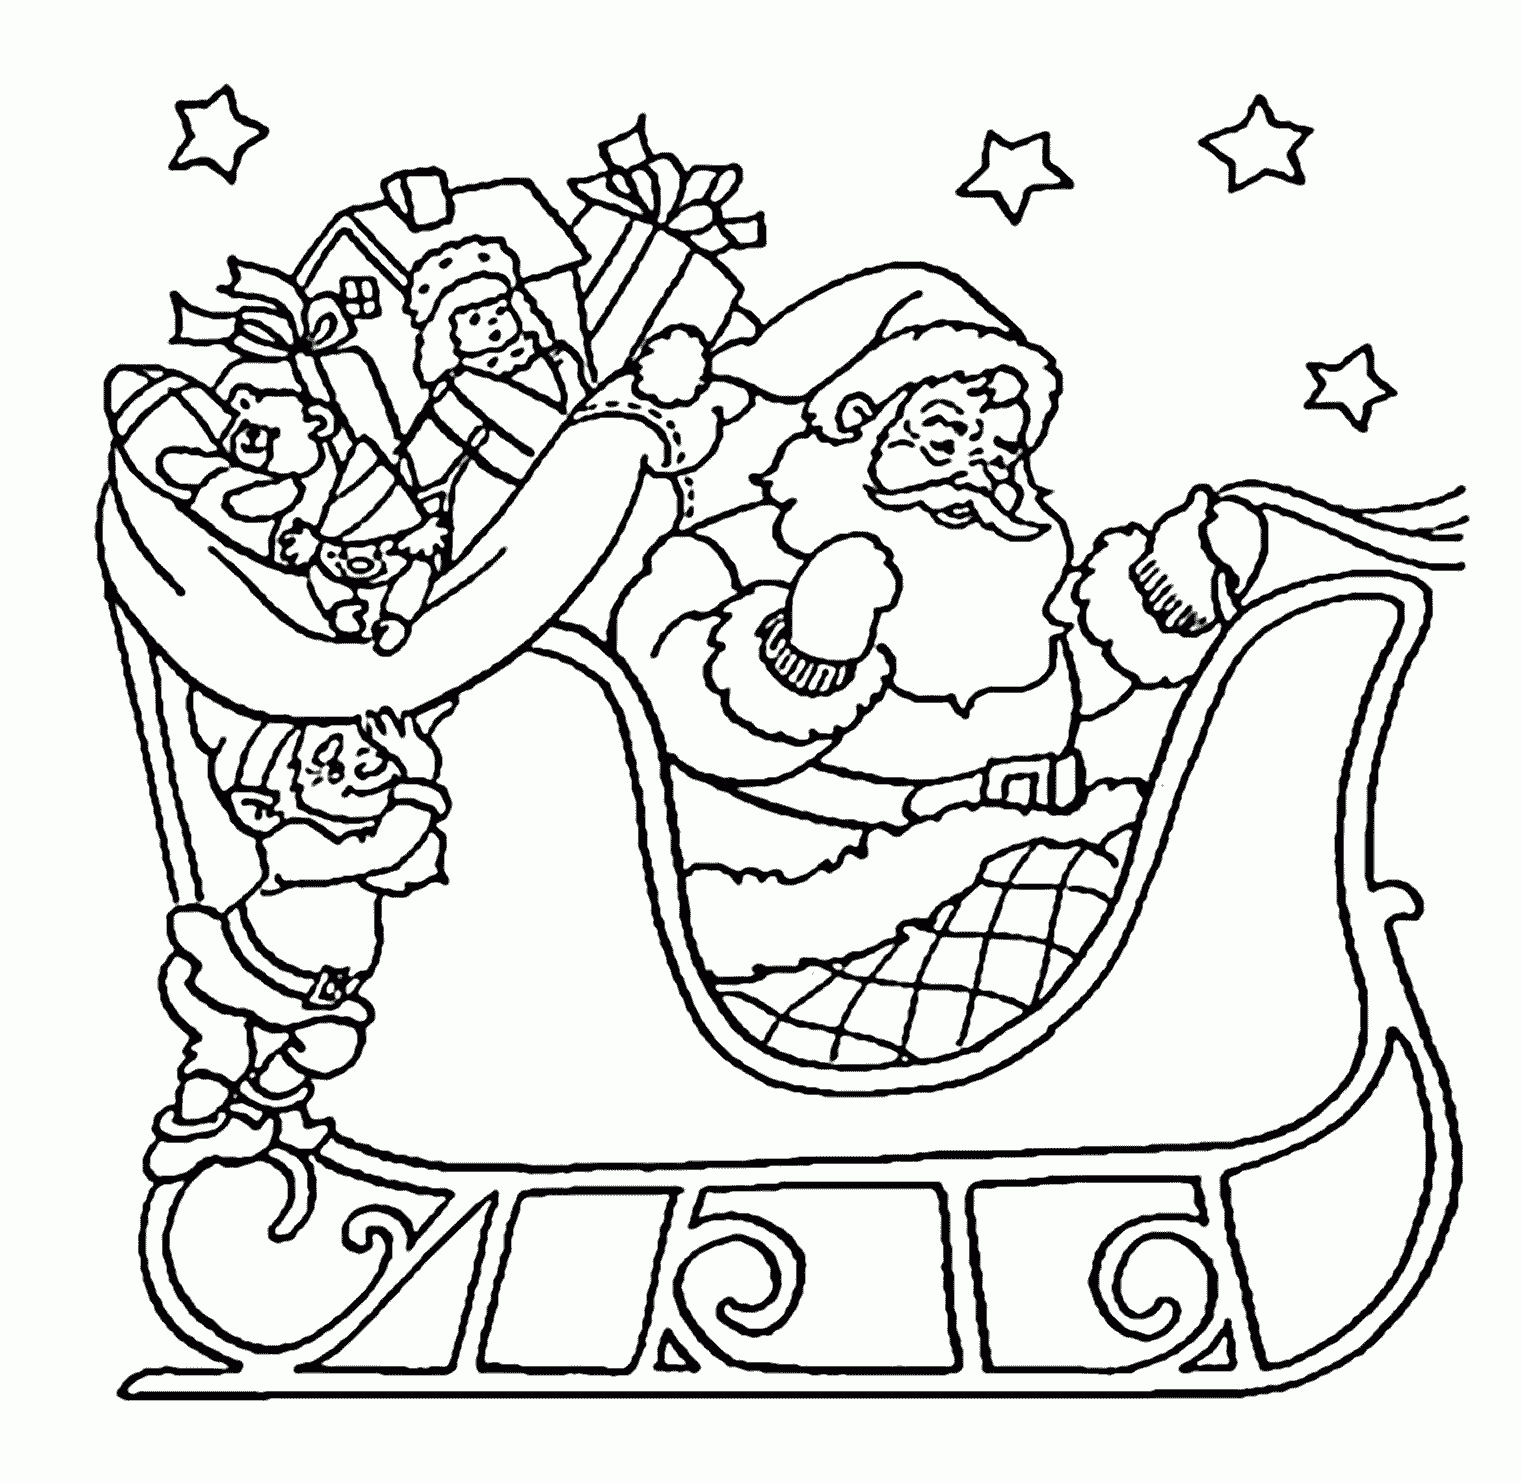 Coloring Pages : Santa Claus On Sleigh Colorings For Kids Printable - Santa Coloring Pages Printable Free